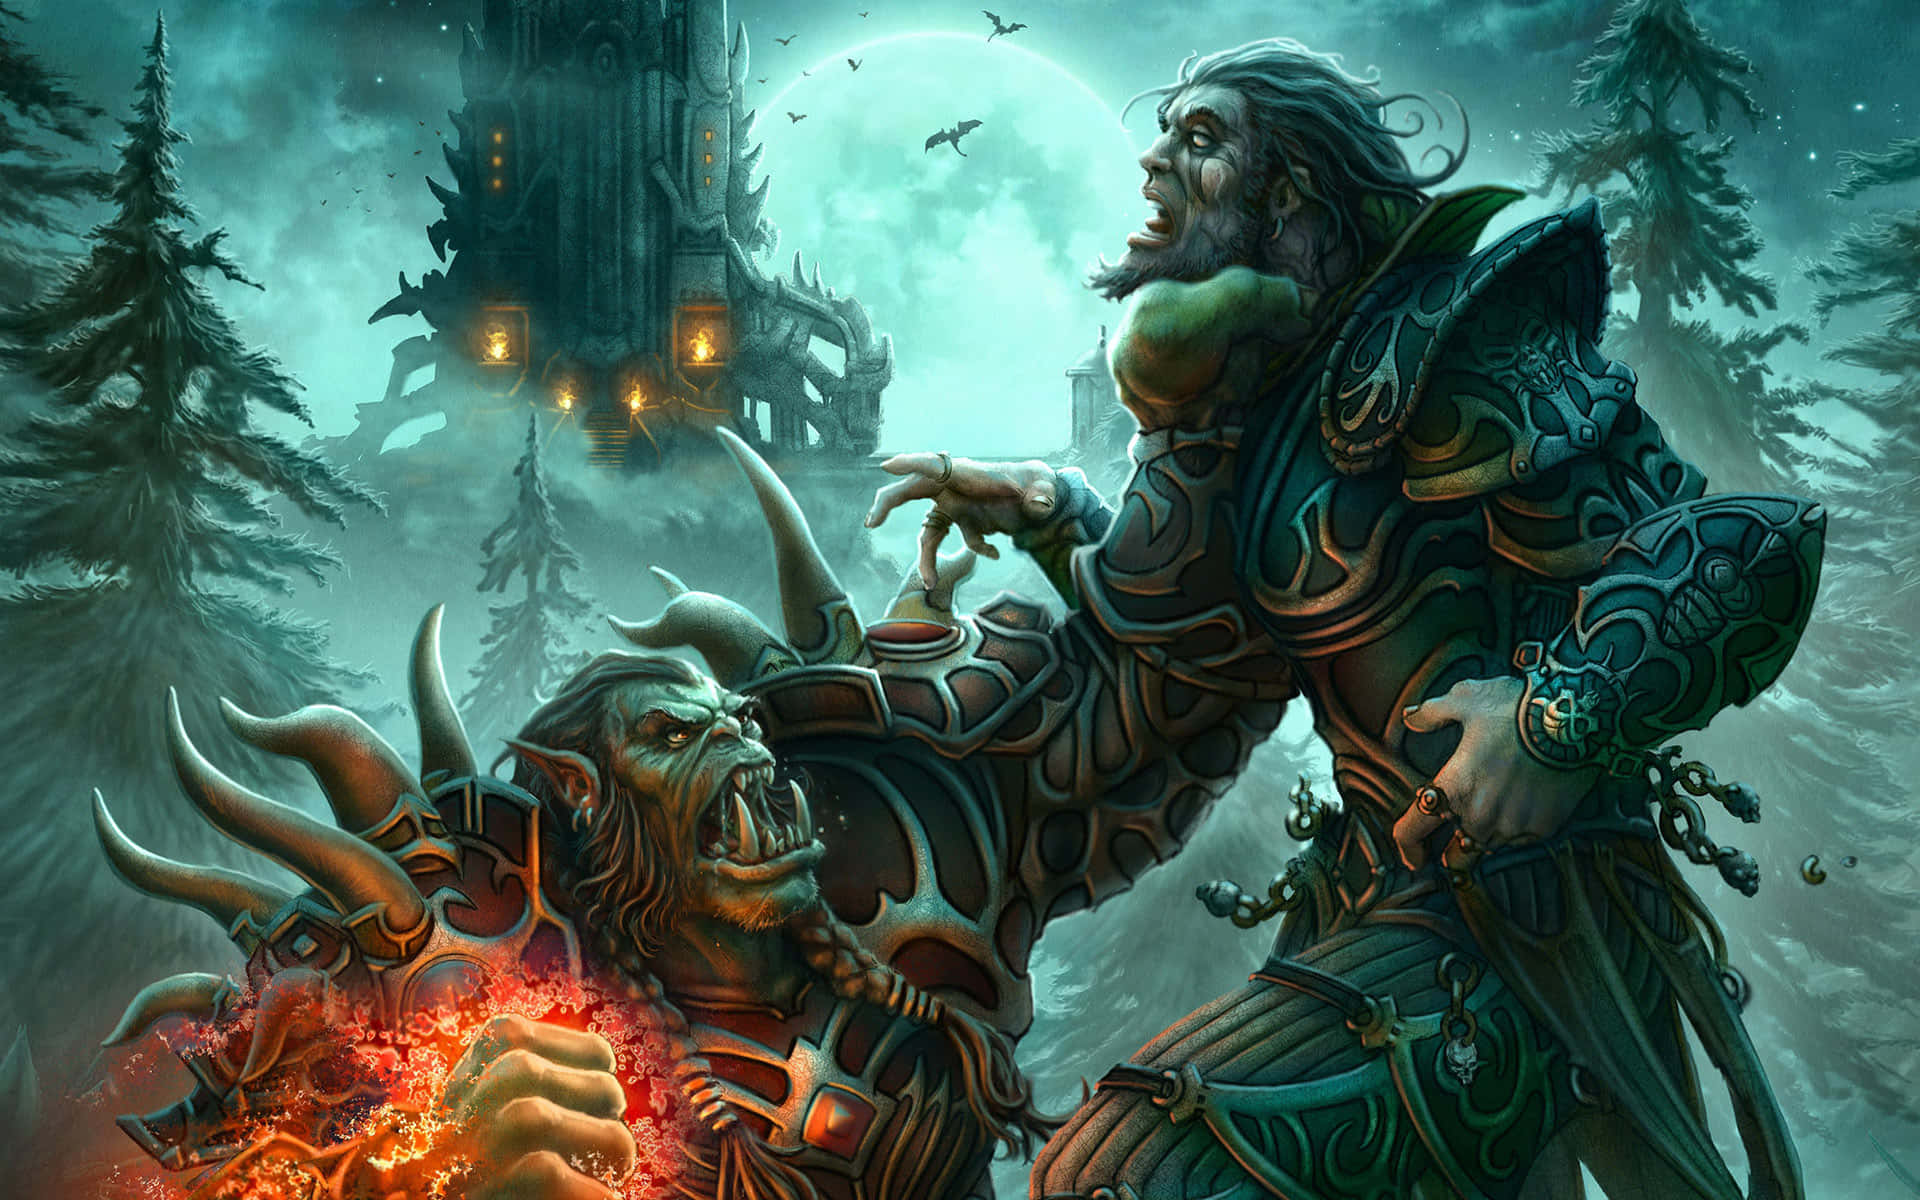 Immerse yourself in the digital world of Hearthstone